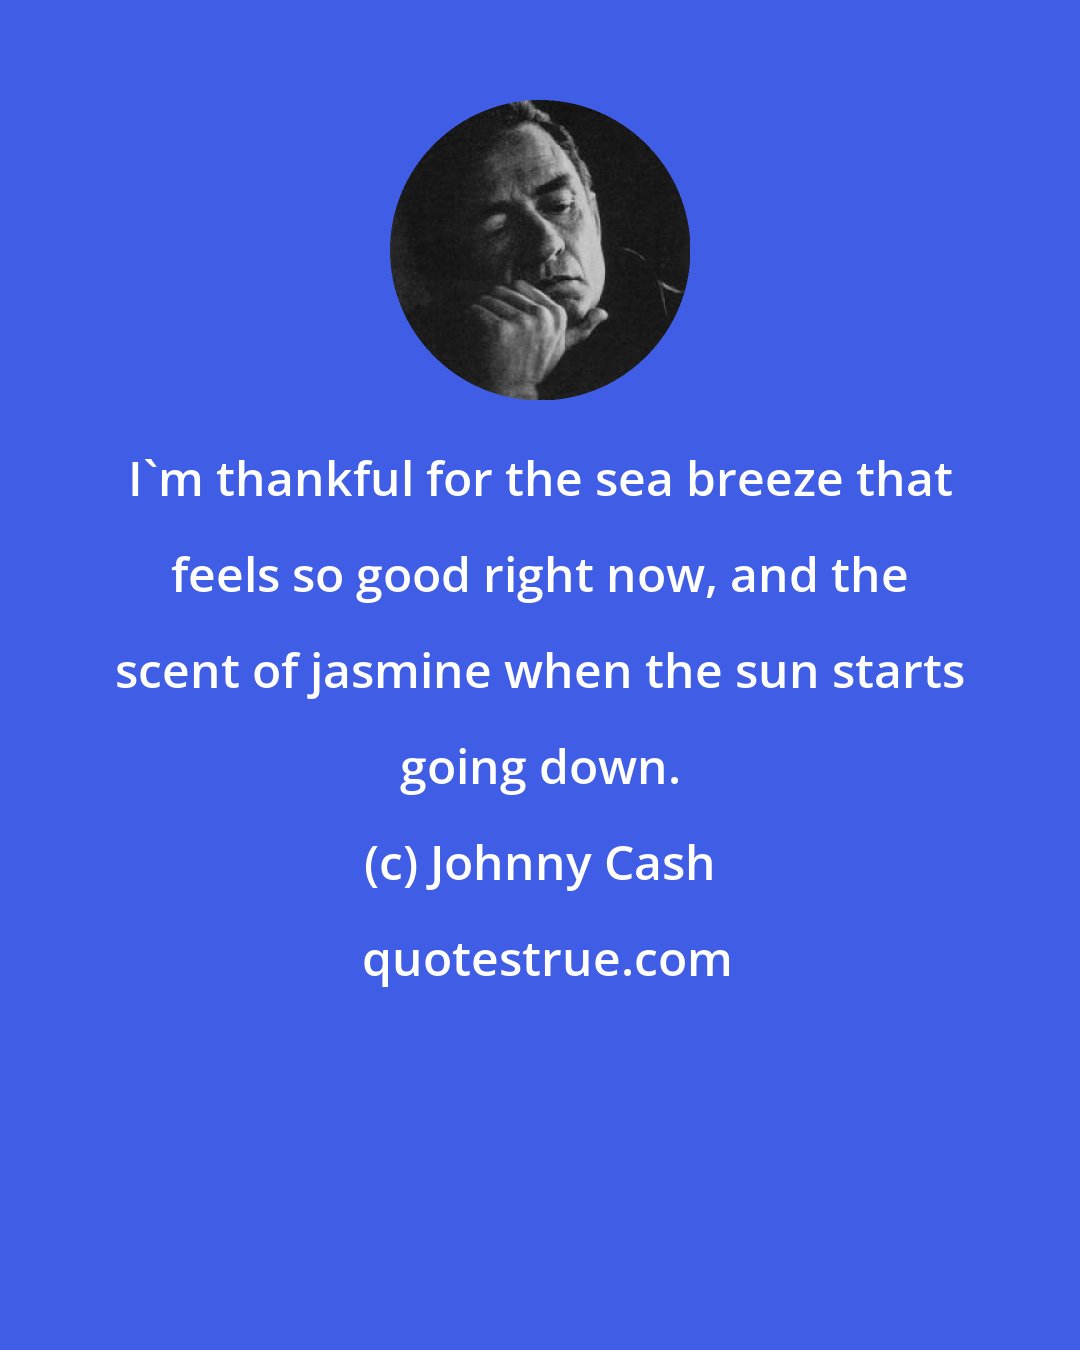 Johnny Cash: I'm thankful for the sea breeze that feels so good right now, and the scent of jasmine when the sun starts going down.